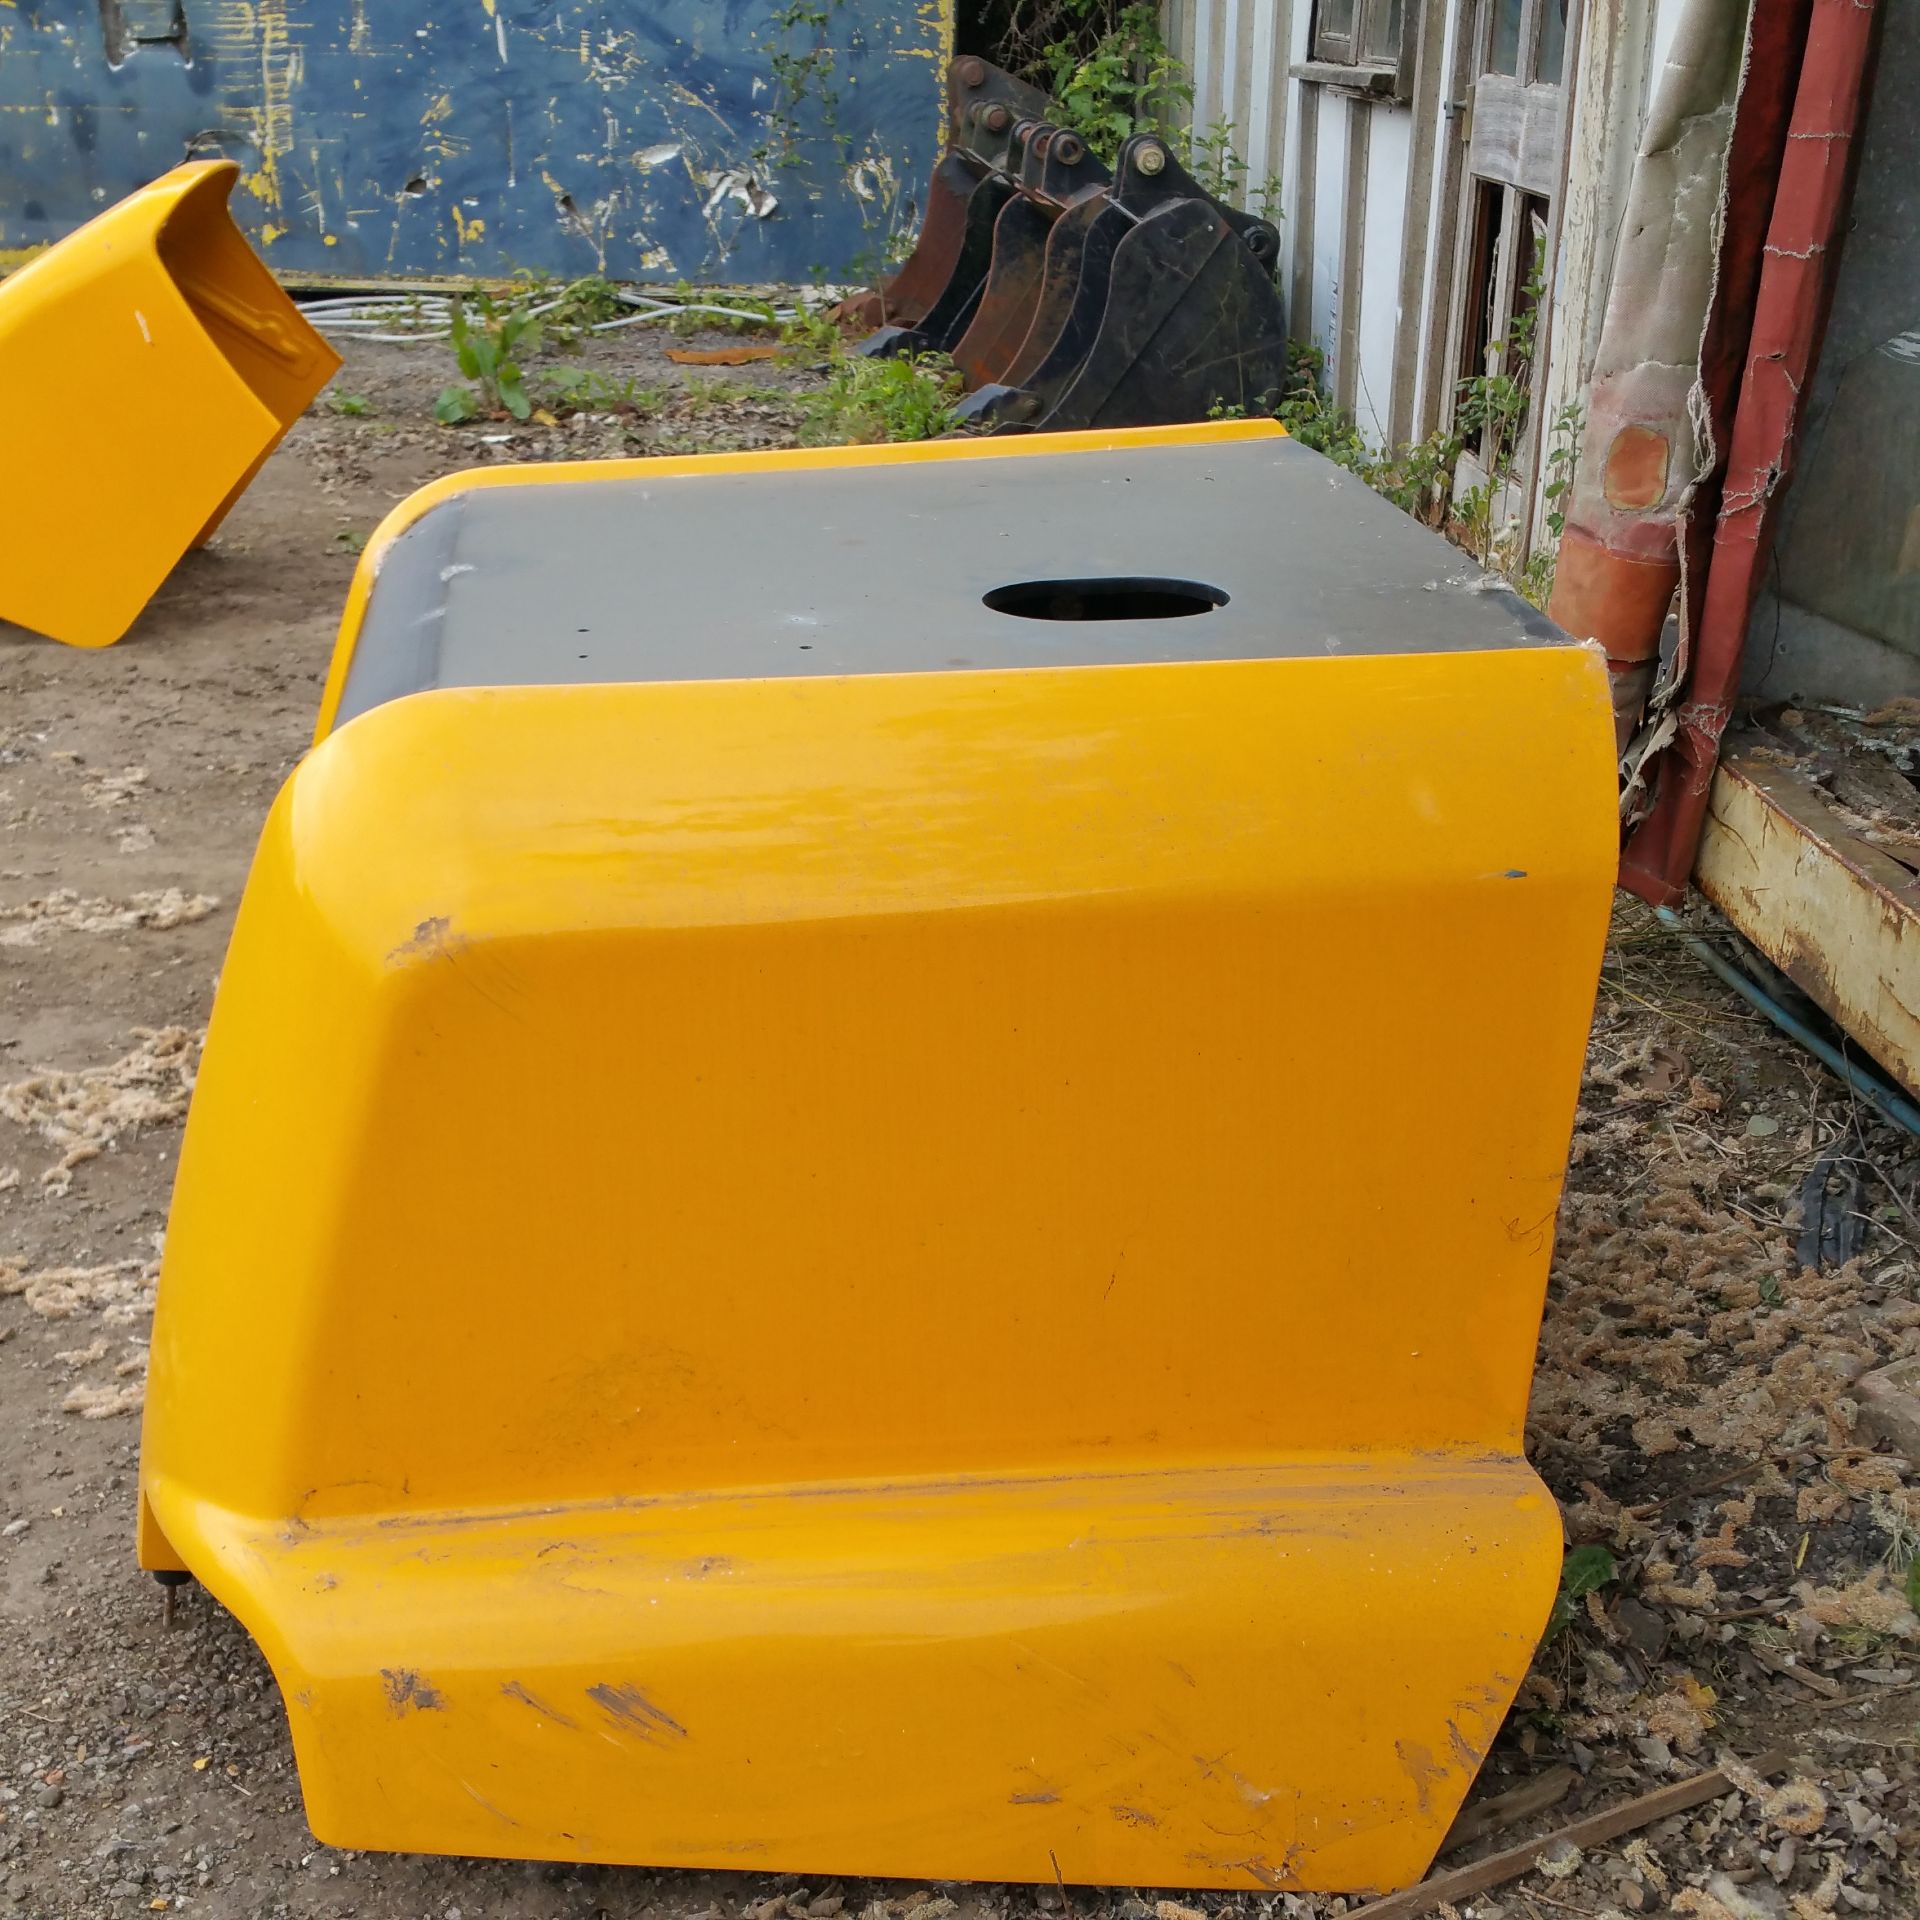 Jcb TM310 bonnet   New and unused   Delivery arranged - Image 3 of 5